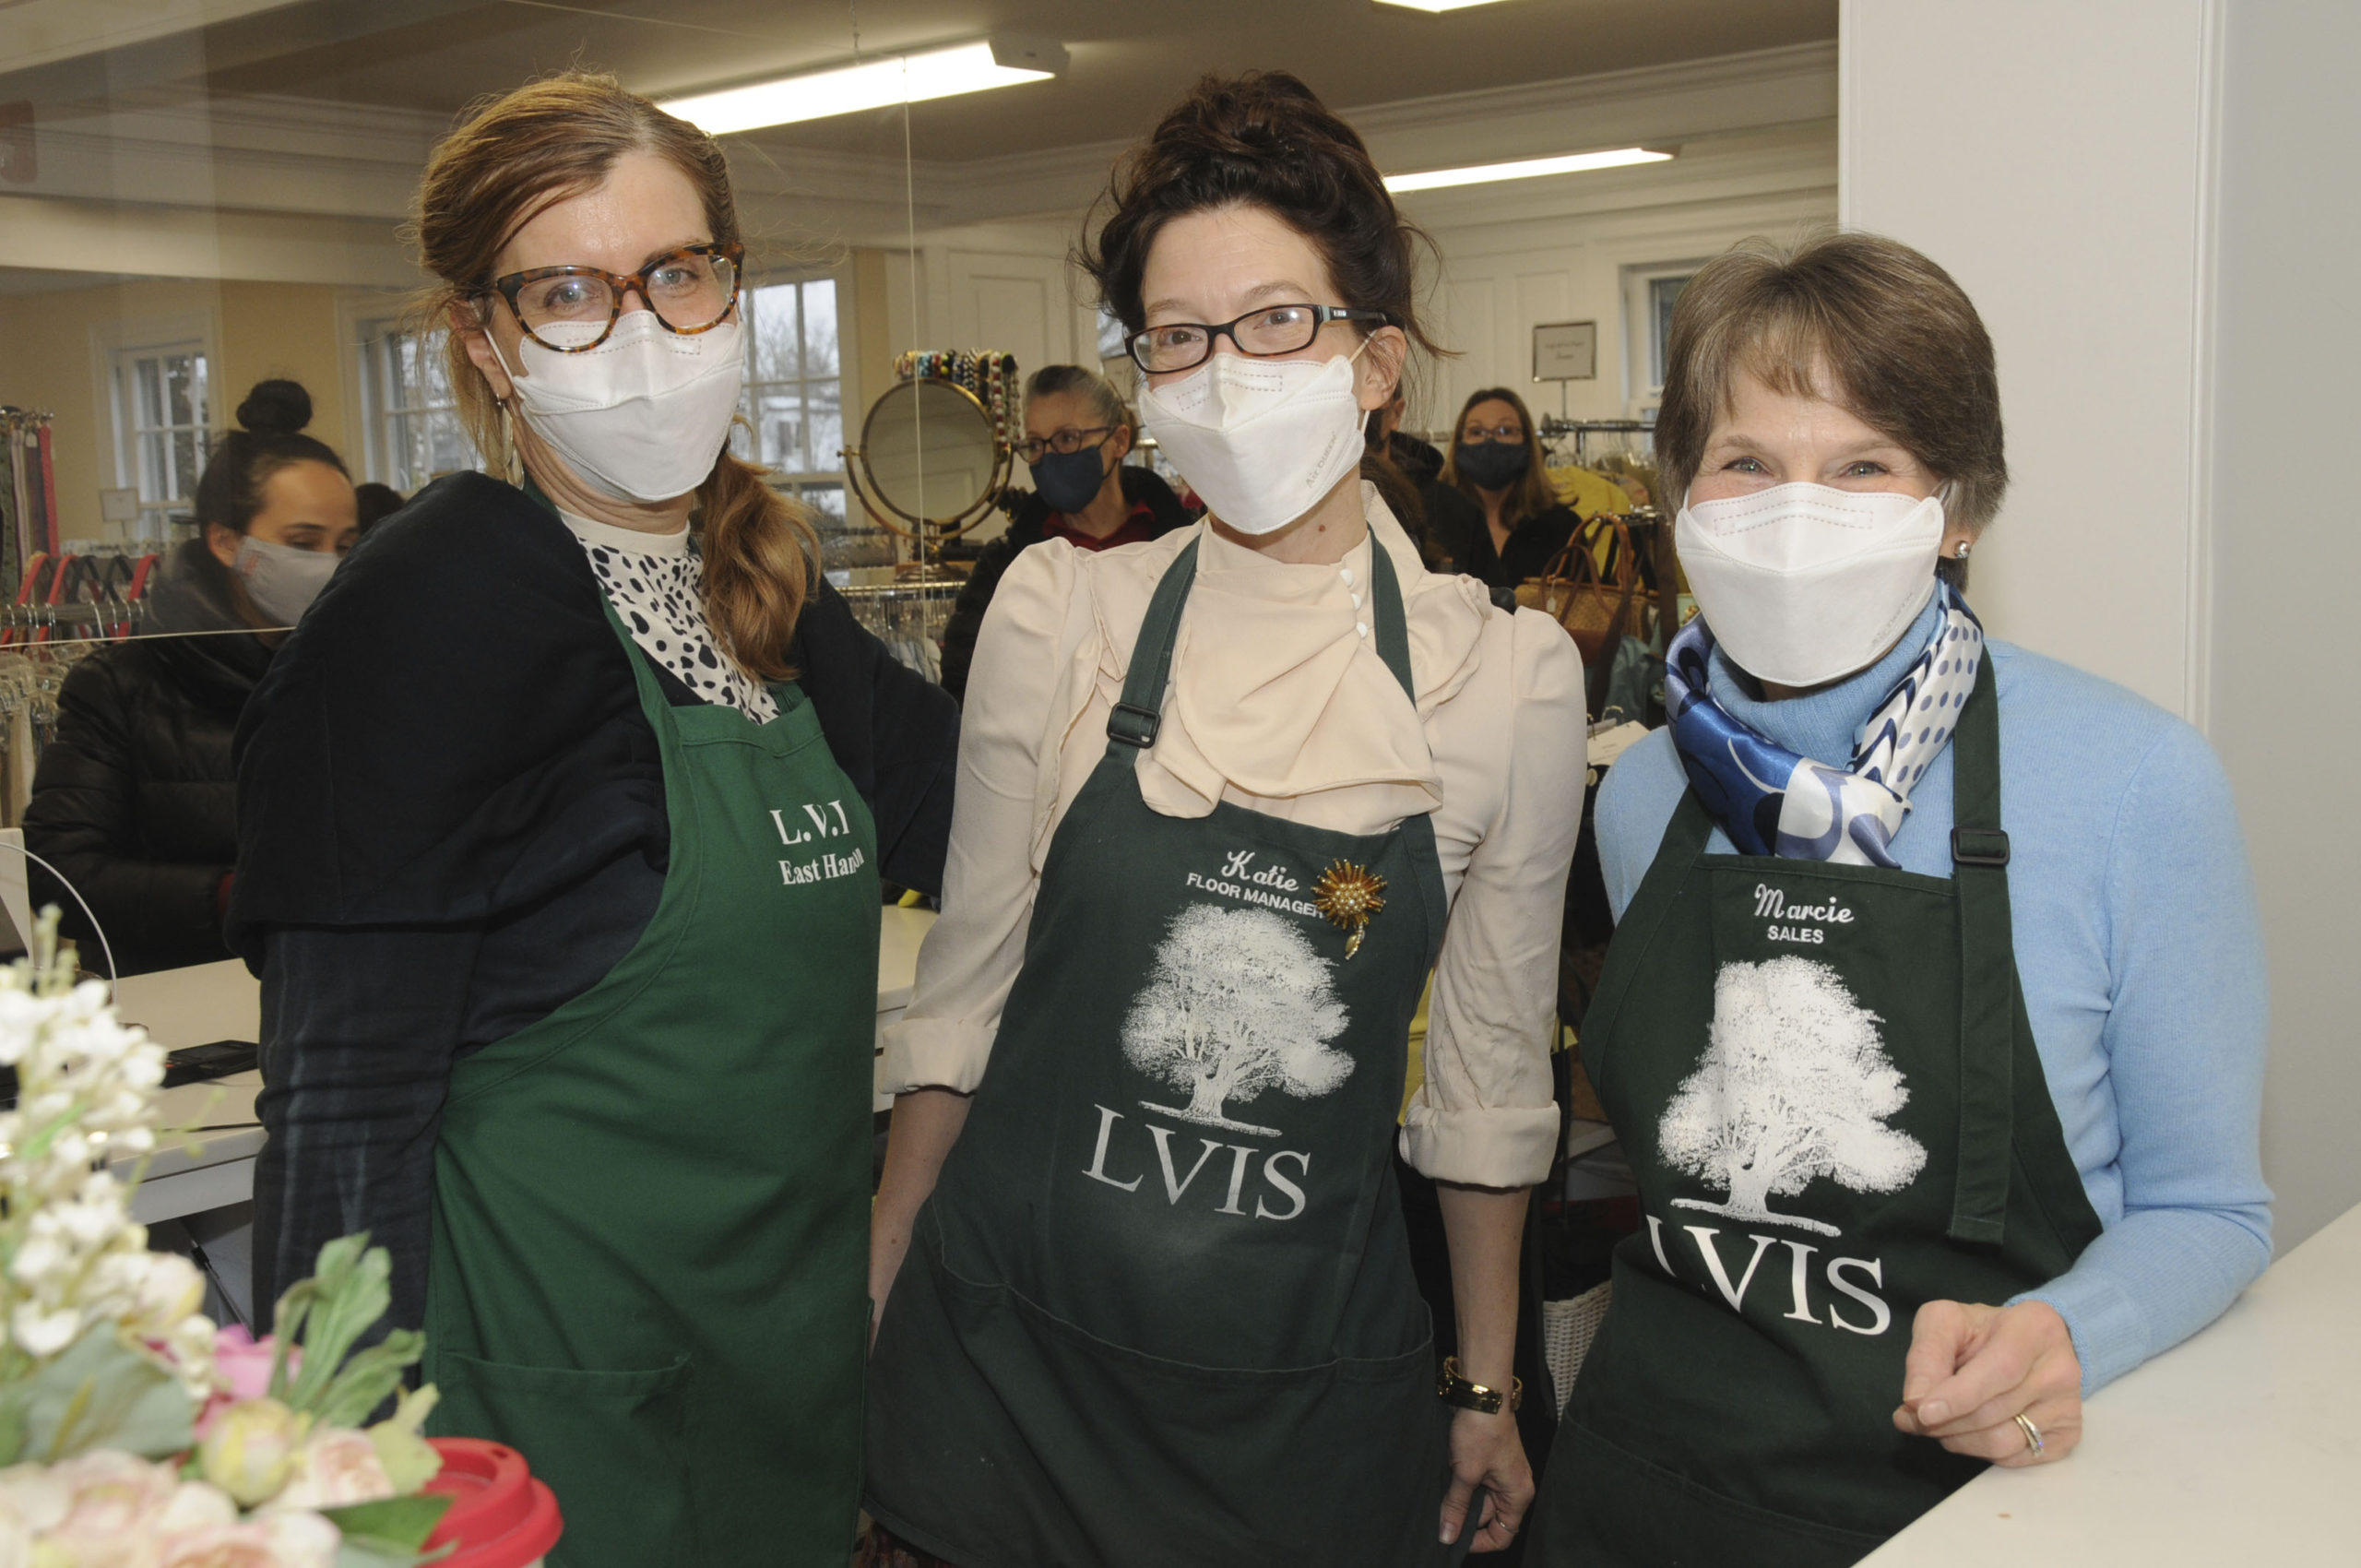 Despite the challenges of the pandemic era, the Ladies' Village Improvement Society of East Hampton held their annual Spring Opening of The Shops At LVIS on Saturday. Left to right, Annie Browngardt, Katie Kulp and Marcie Reed.    RICHARD LEWIN